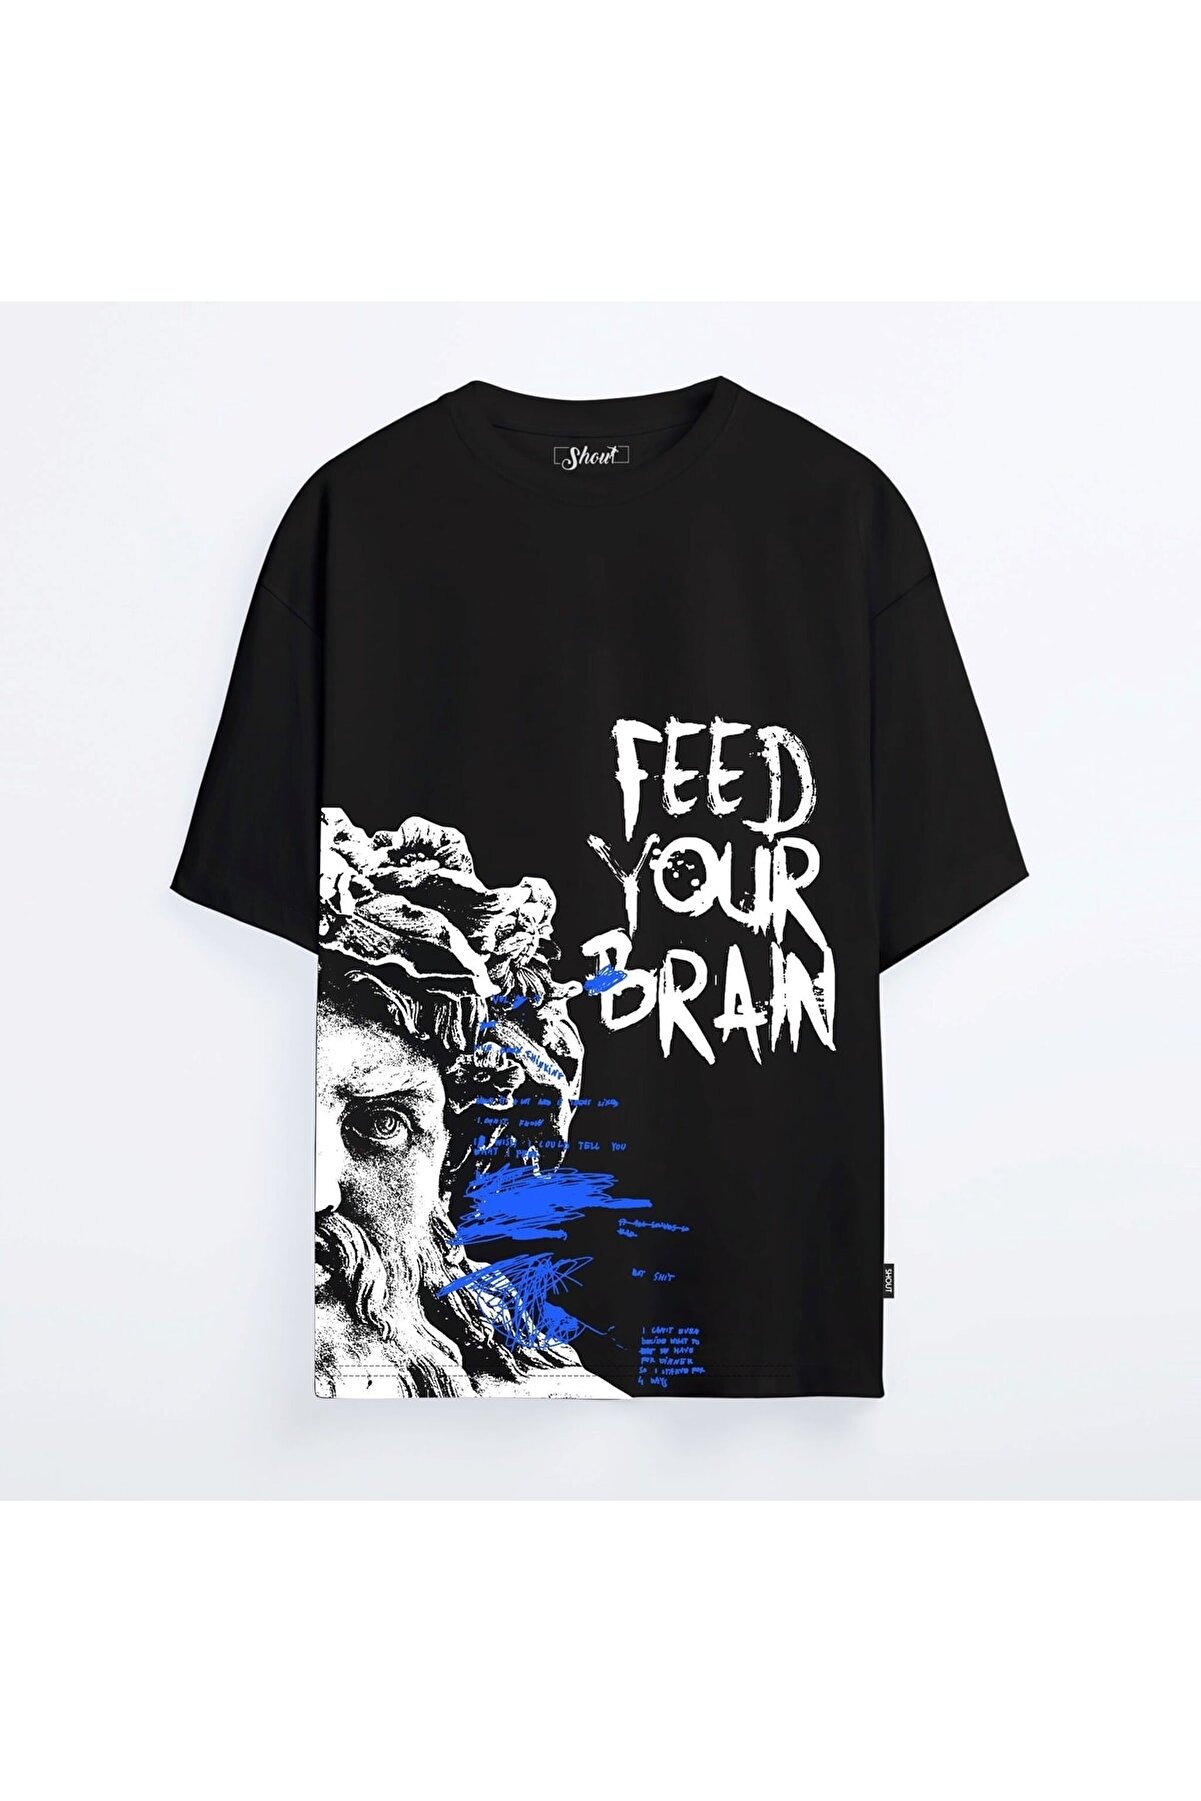 Shout Oversize Limited Edition Feed Your Brain Unisex T-shirt